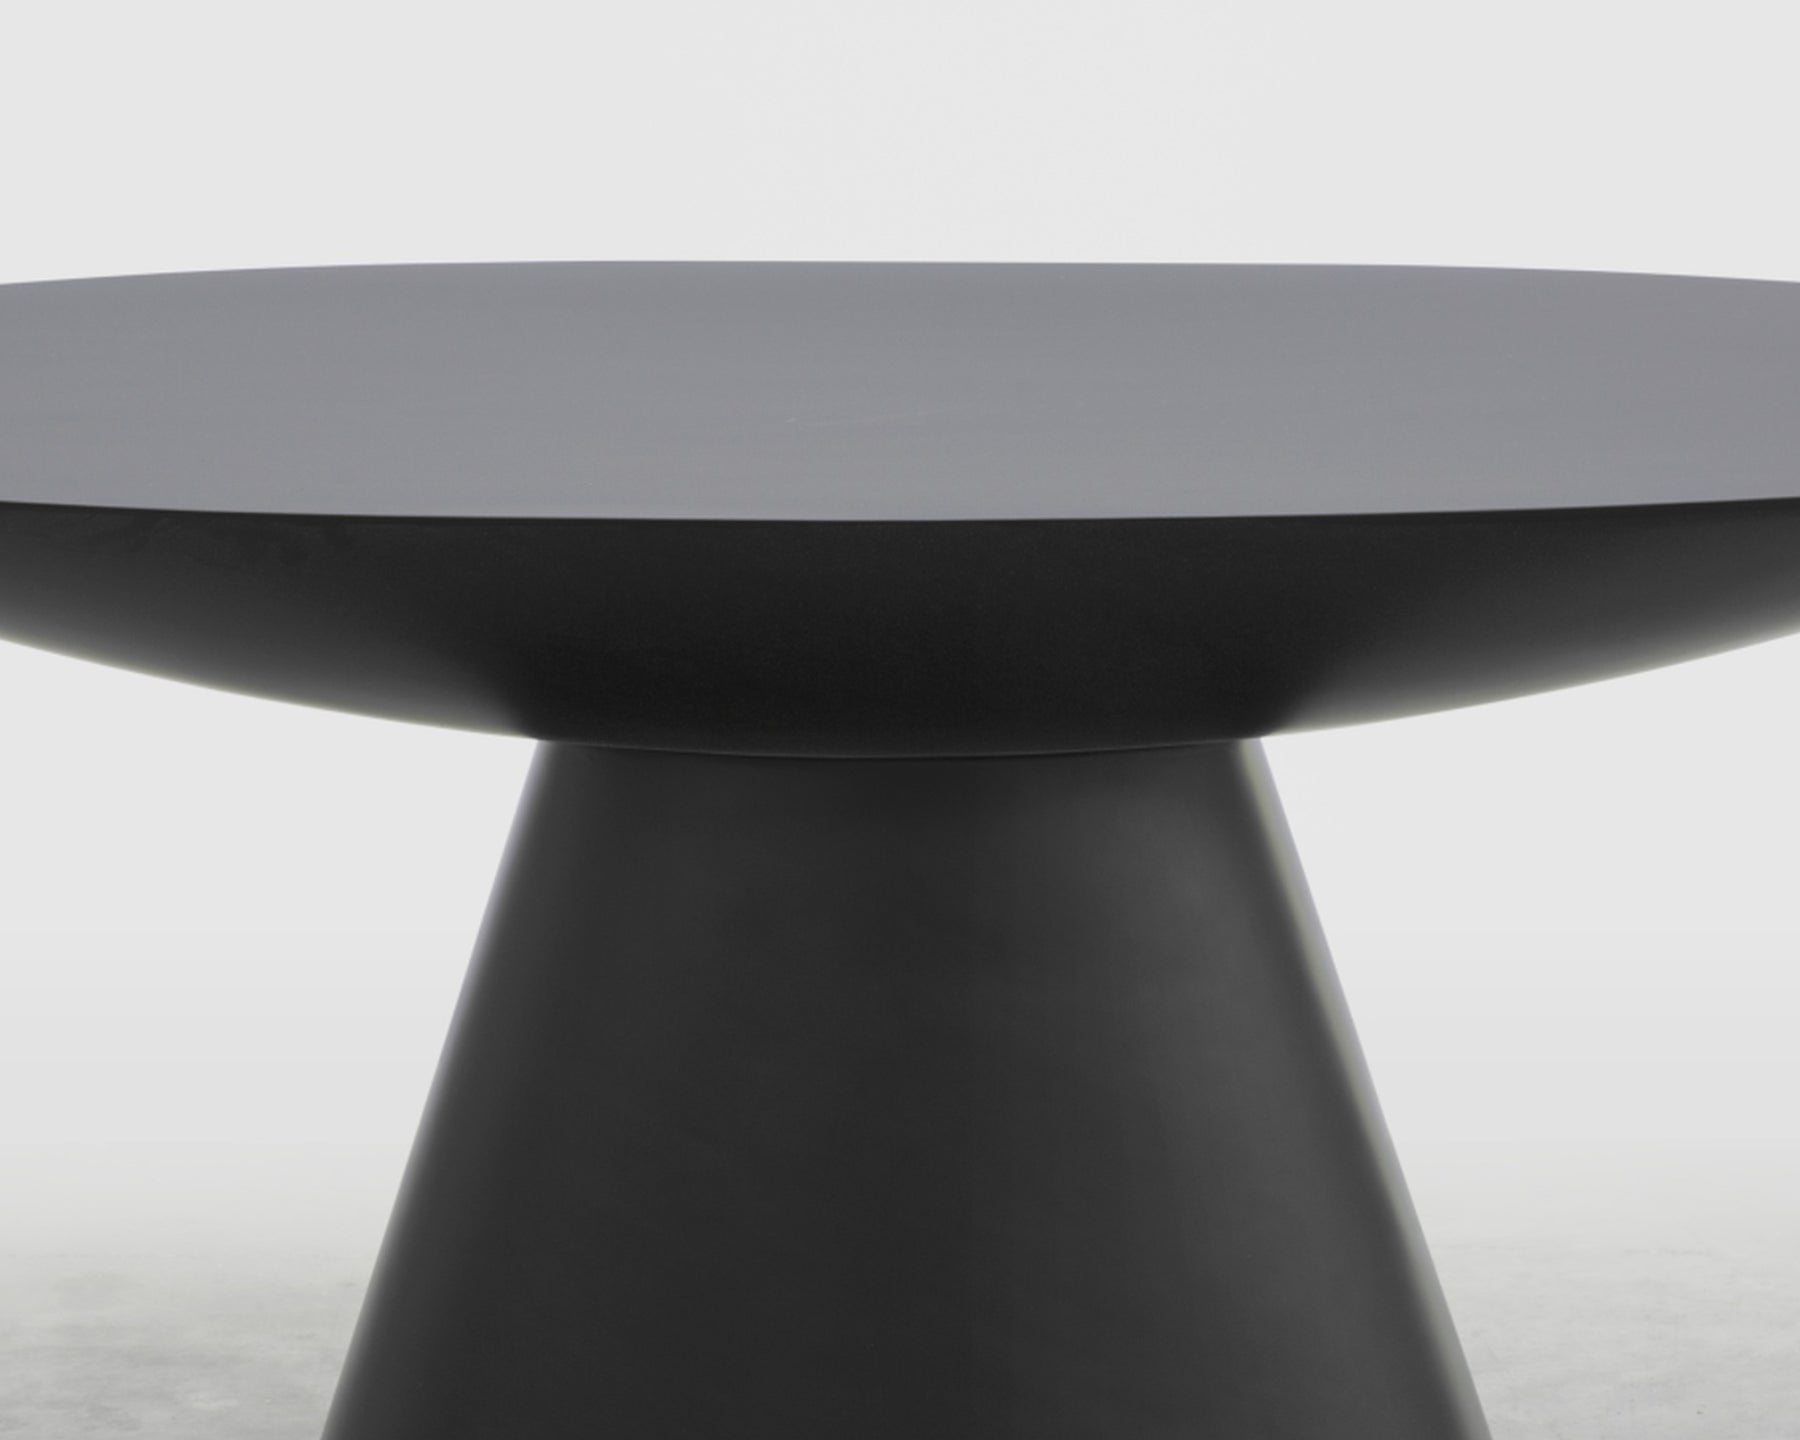 Black Oval Dining Table | DSHOP